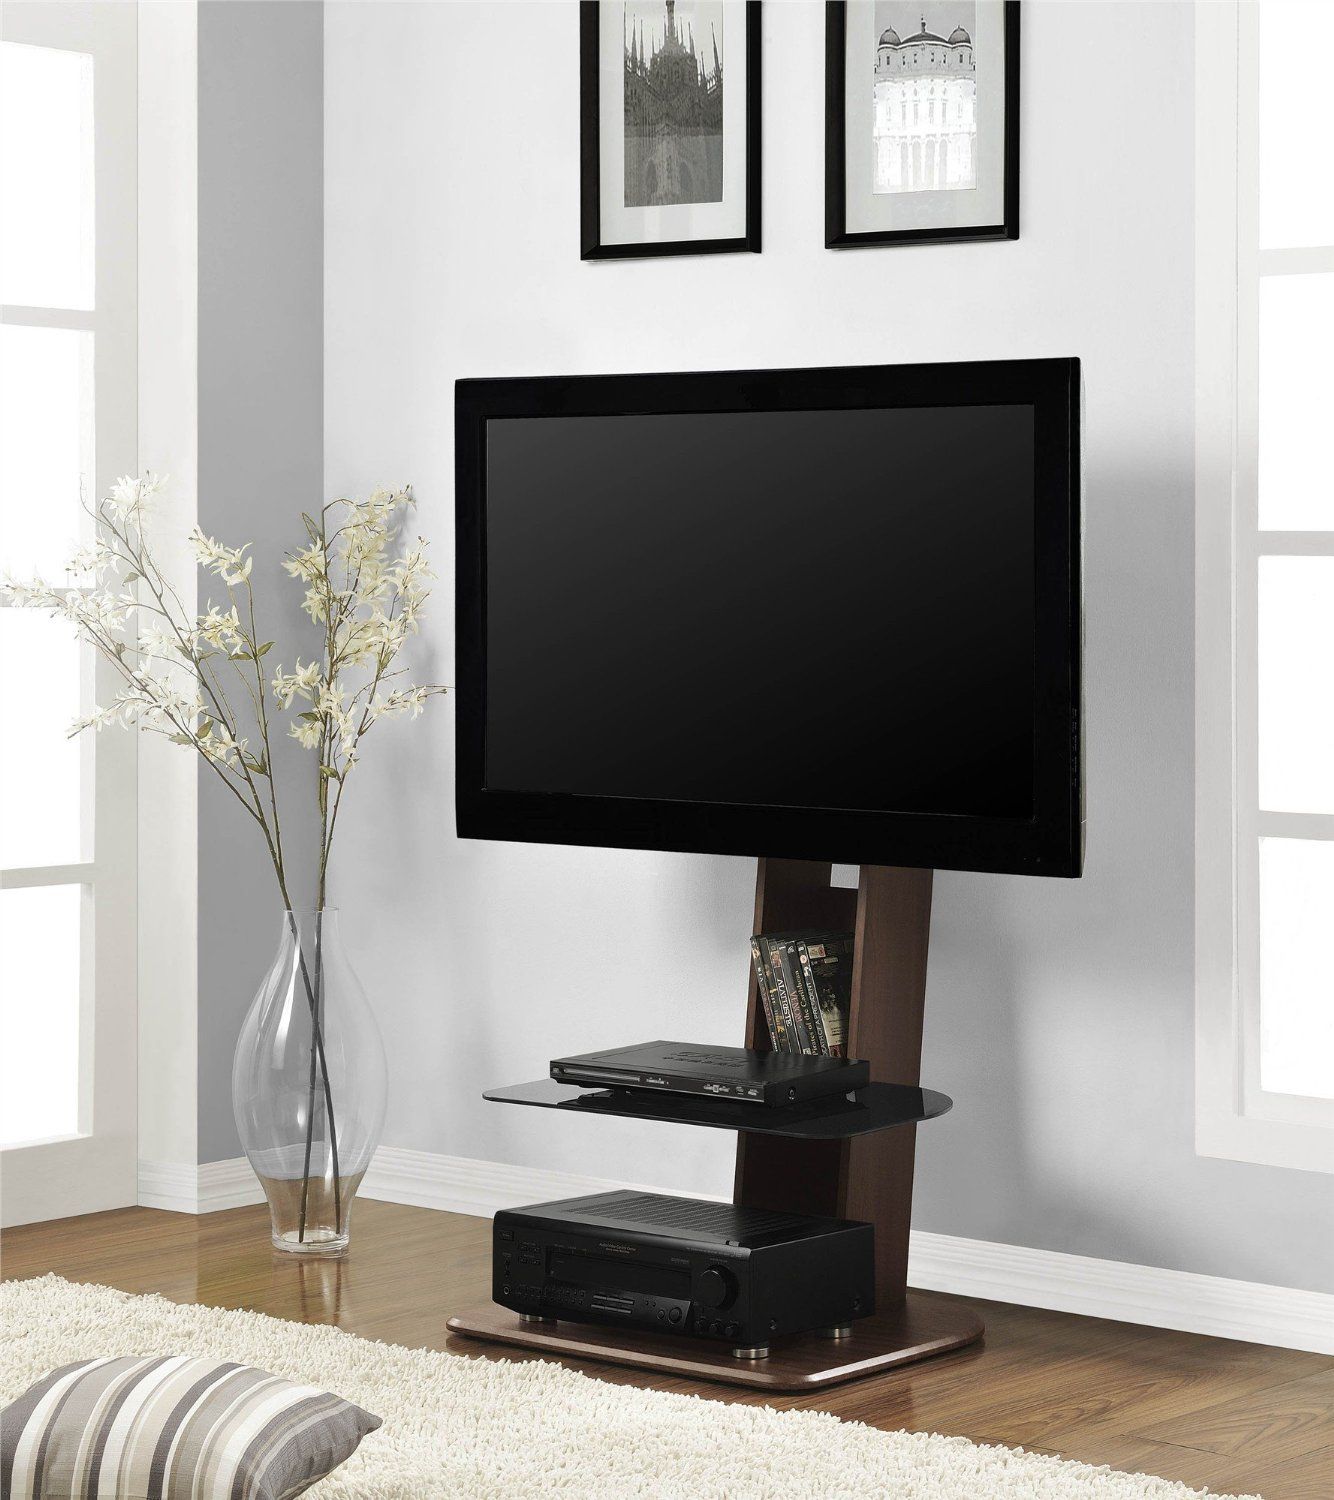 Altramount Tv Stands From The Altra Furniture – Homesfeed Regarding Tv Stands For Plasma Tv (View 10 of 15)